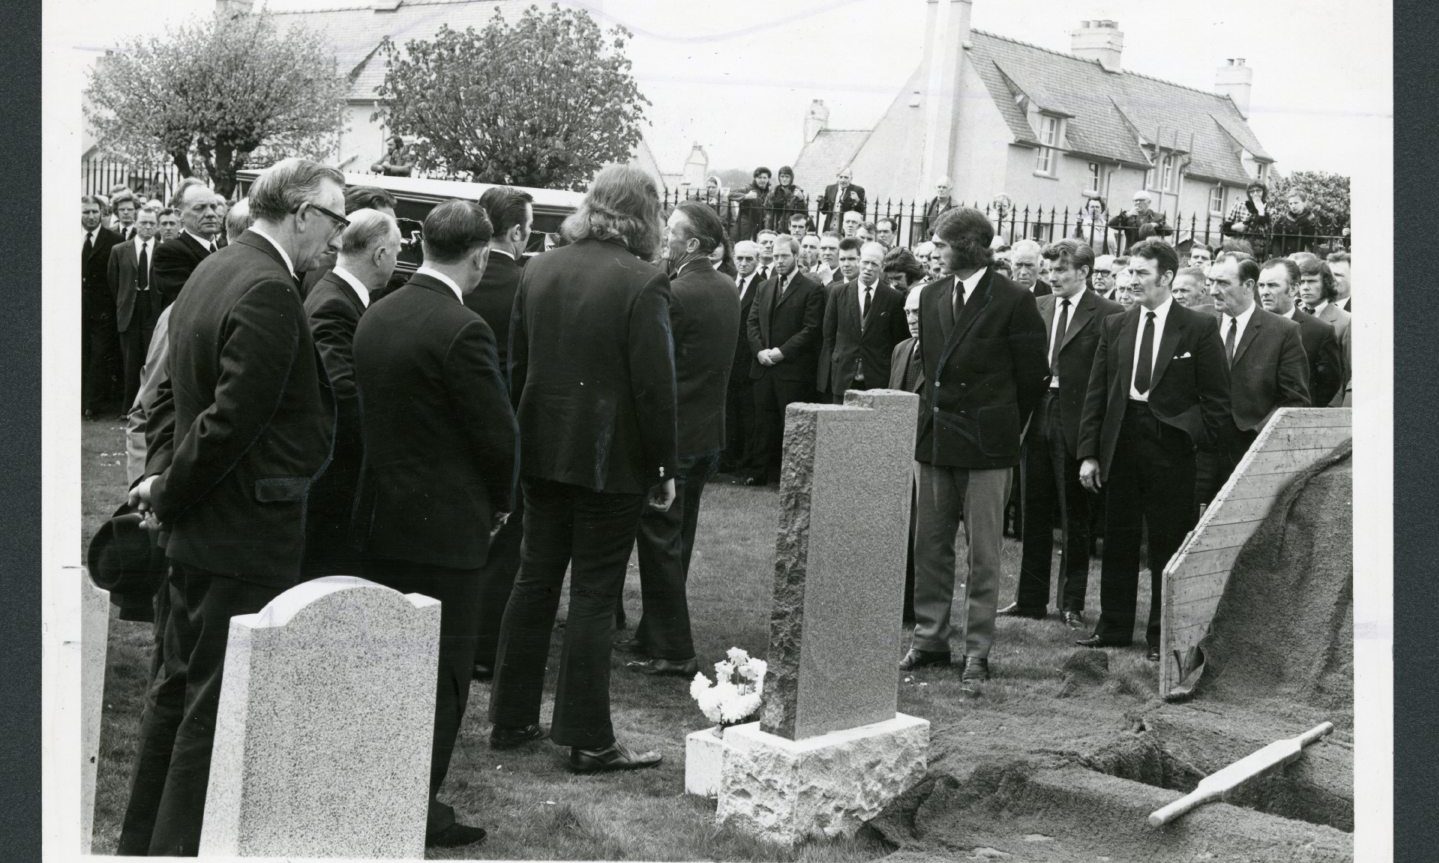 Bid for Seafield Colliery disaster memorial 50 years on from tragedy